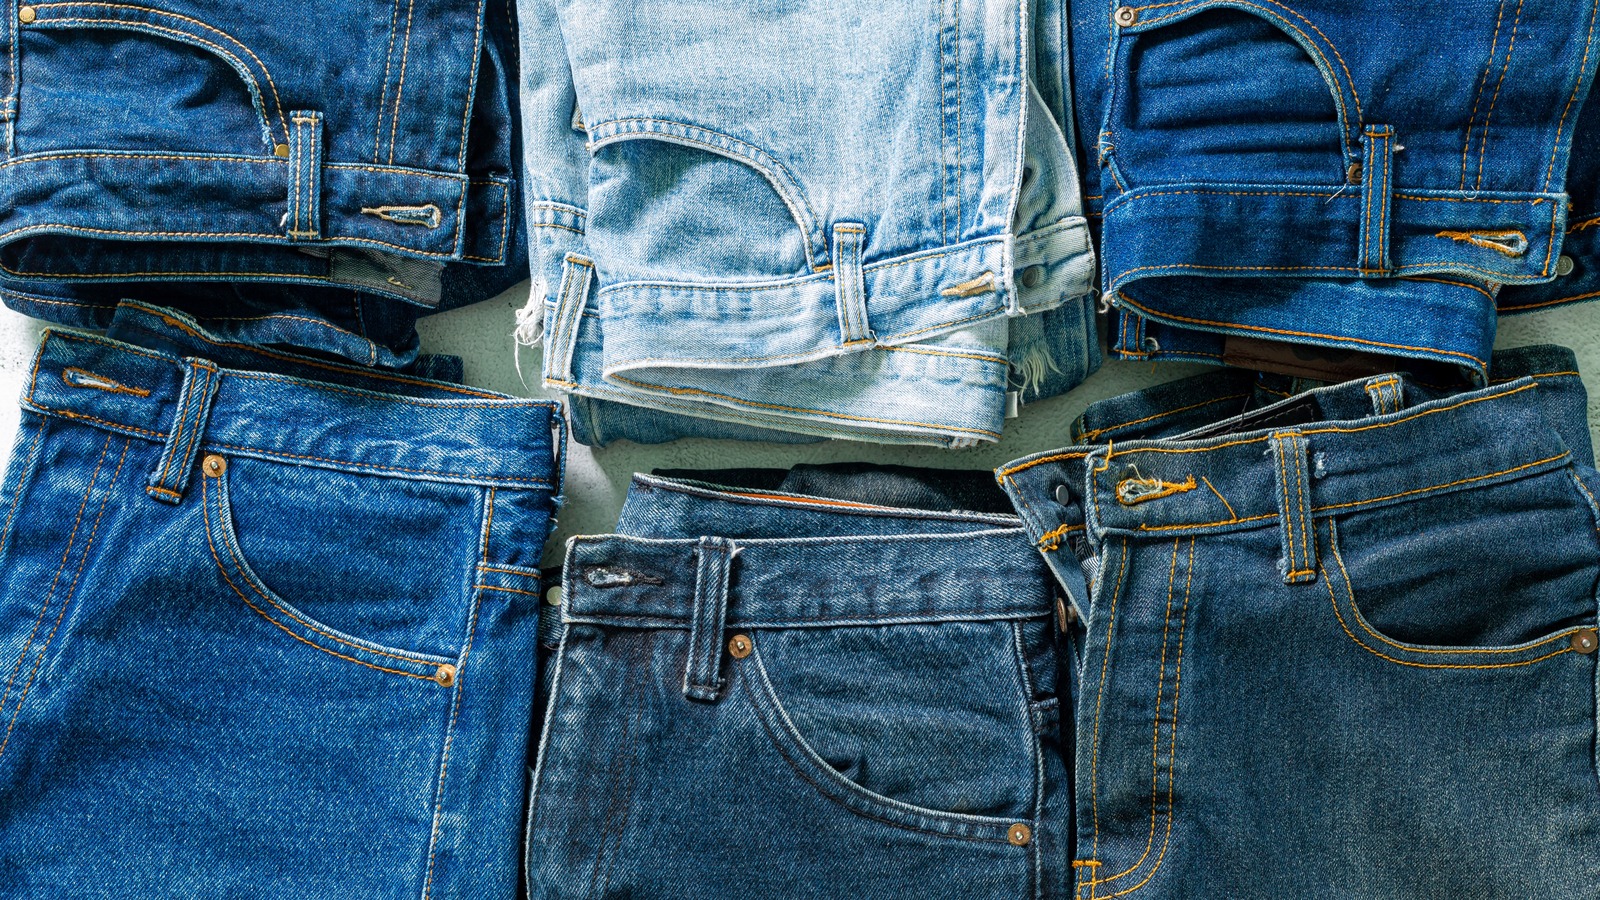 How To Prevent Your Jeans From Fading